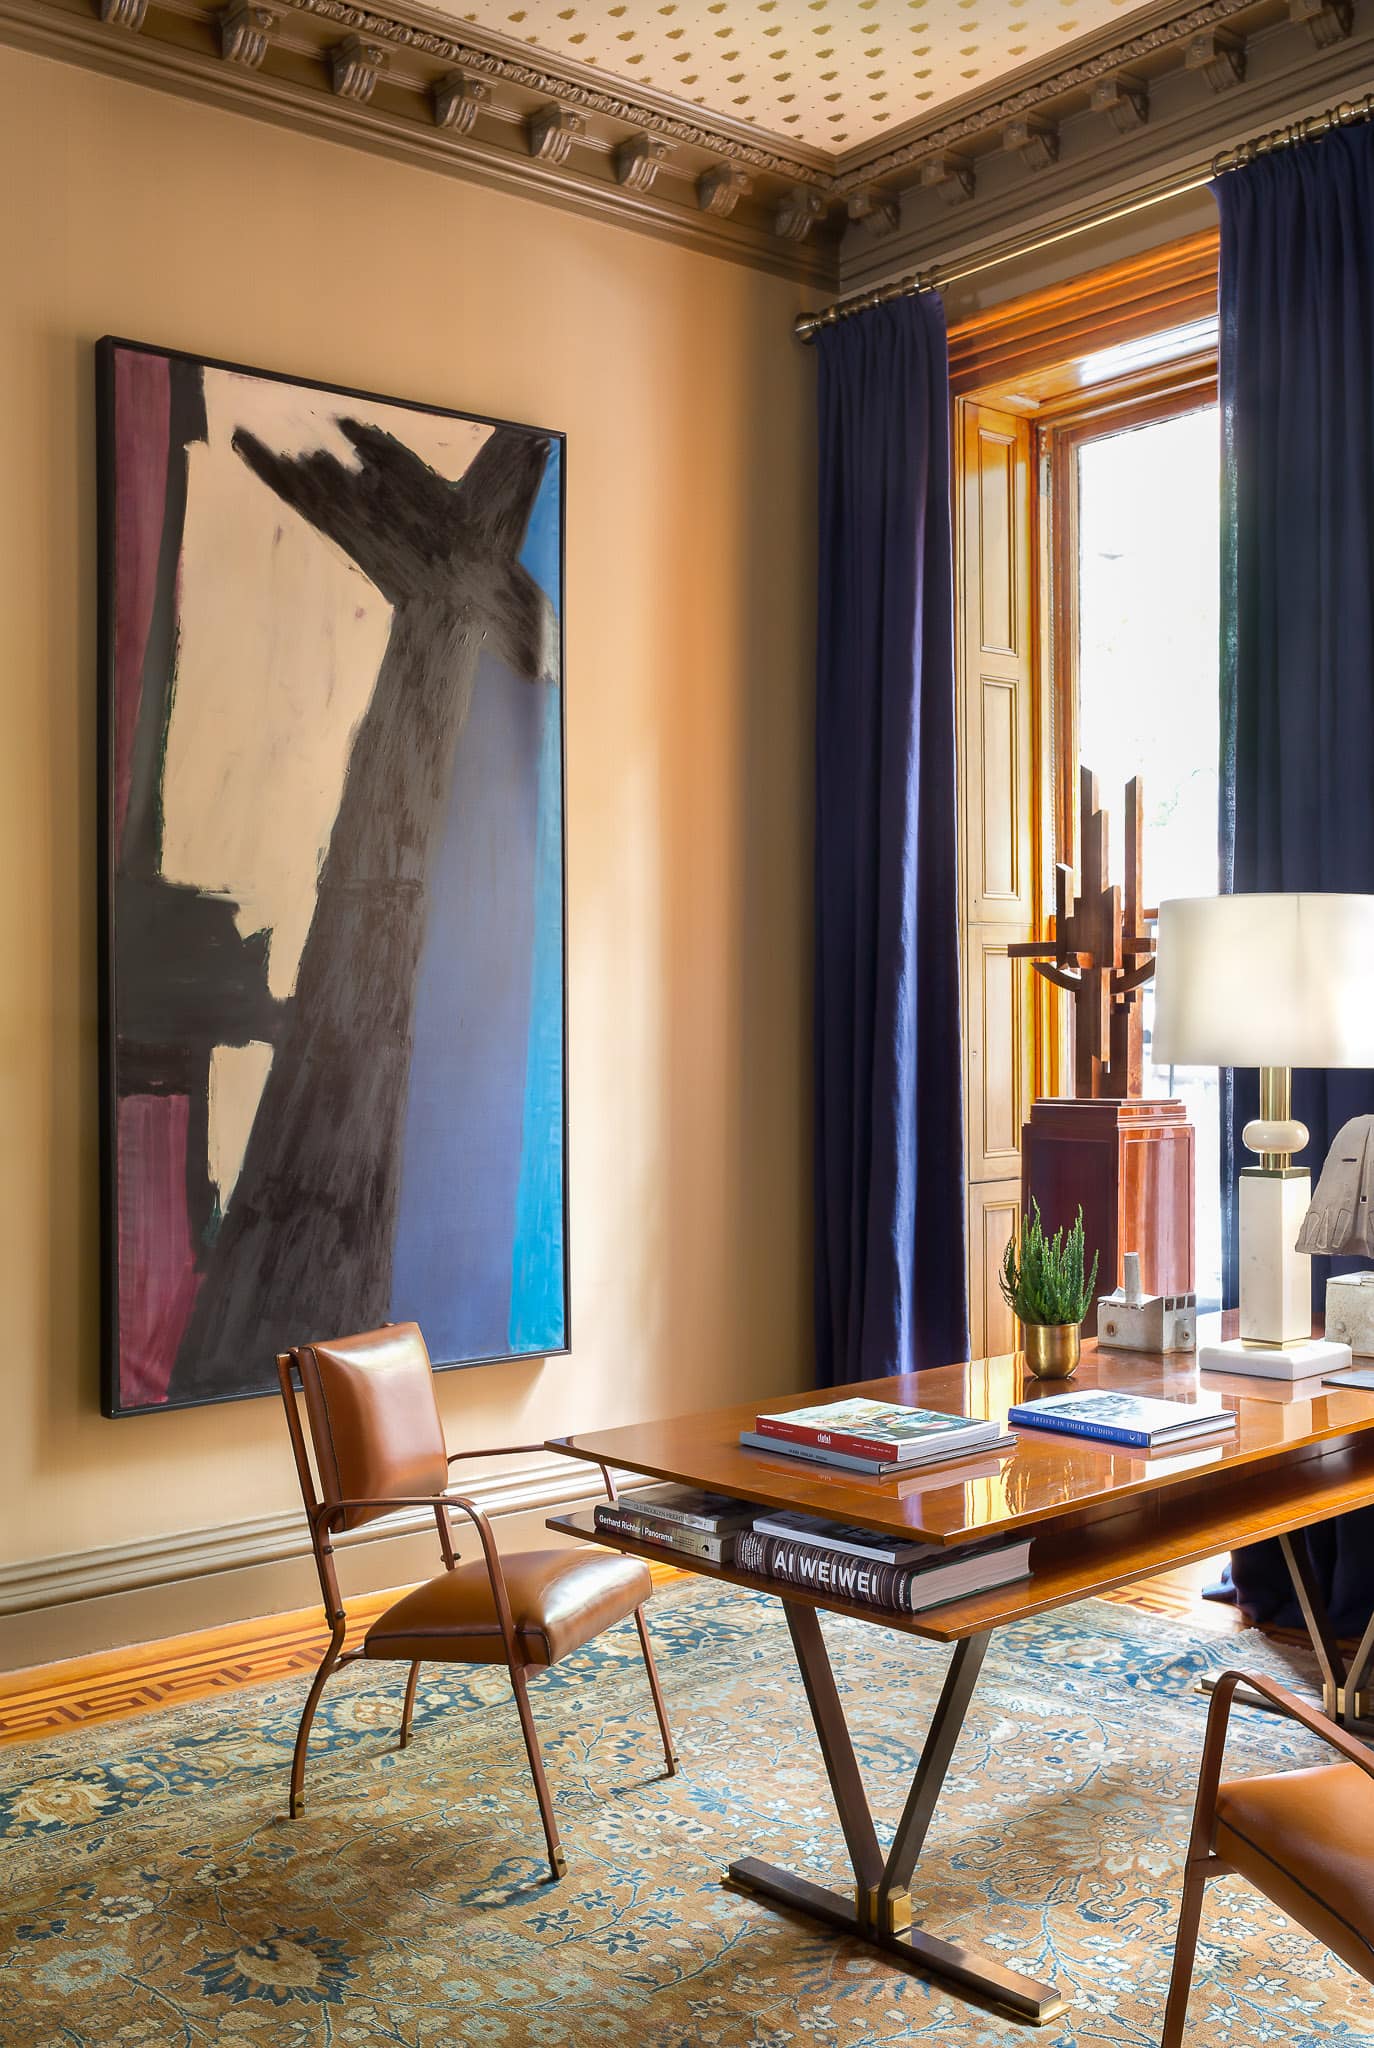 The 1959 painting by Abstract Expressionist painter Judith Godwin, entitled ‘Black Cross’, pairs beautifully with the striking Jules Leleu modernist table-desk and the pair of vintage Jacques Adnet leather-wrapped chairs. The rusted steel sculpture by Marino di Teana sits proudly on a mahogany pedestal in the window.